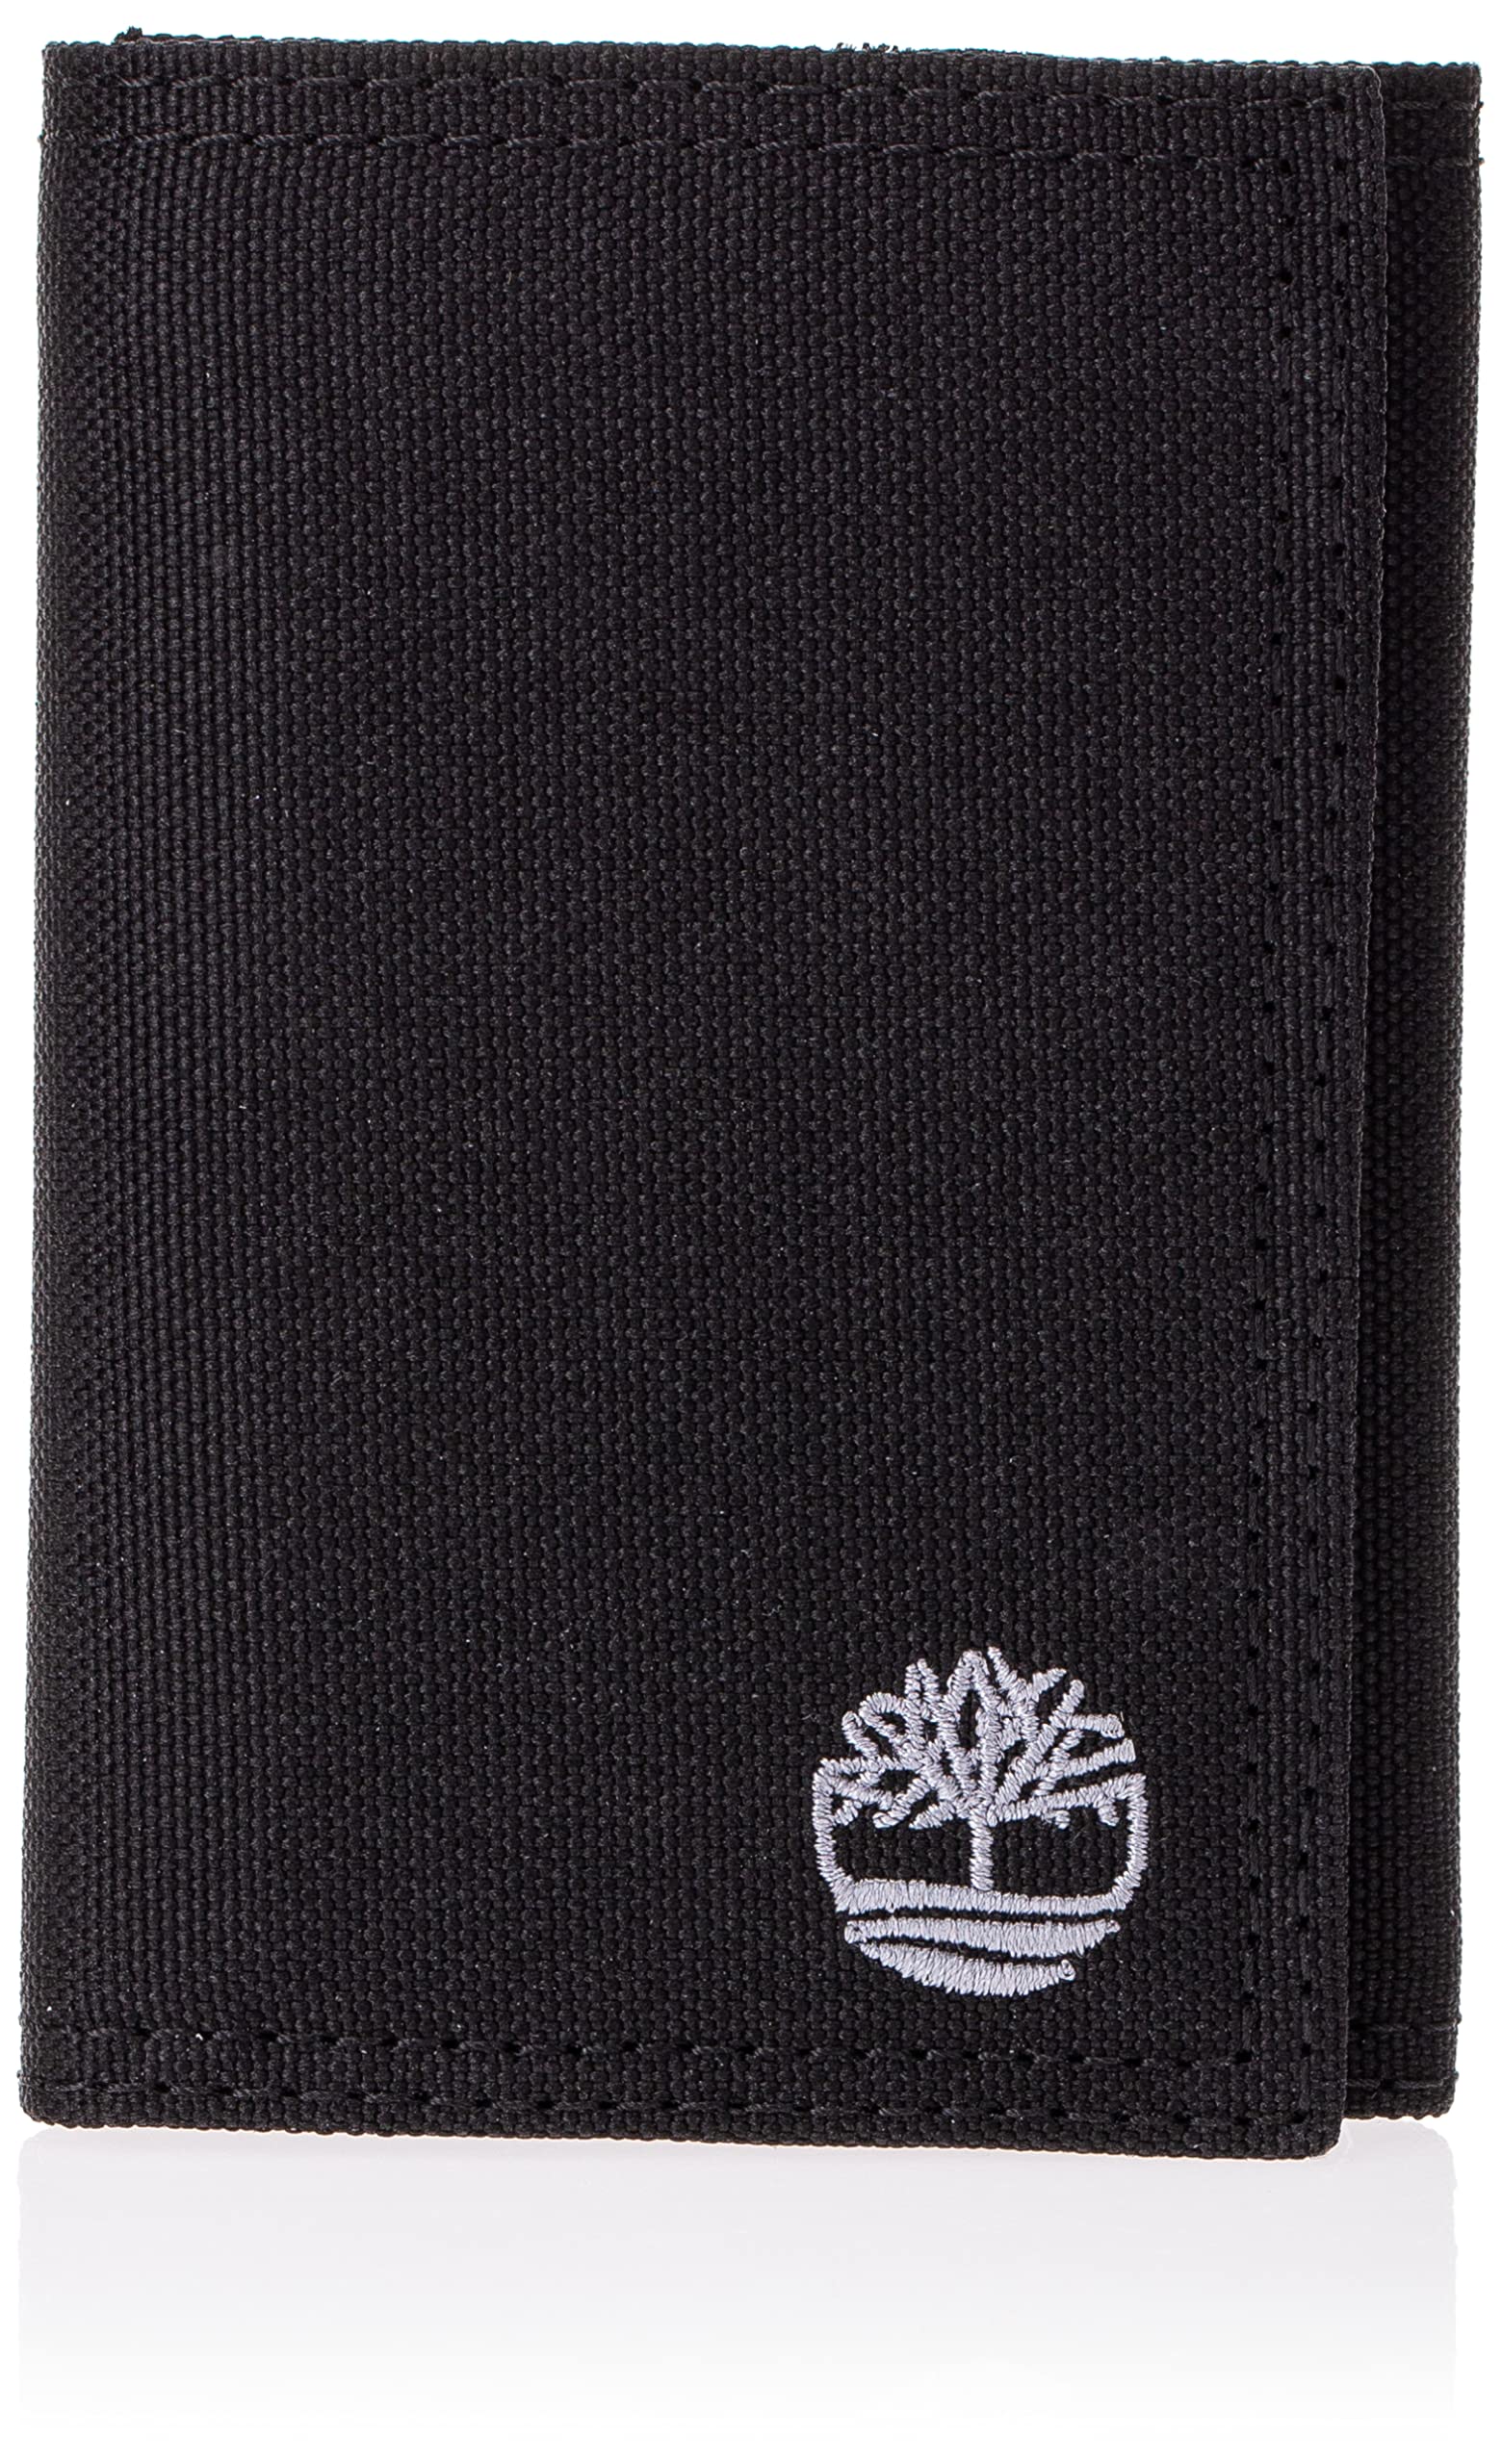 Timberland Men’s Trifold Nylon Wallet (Black) $7.48 + Free Shipping w/ Prime or on $25+